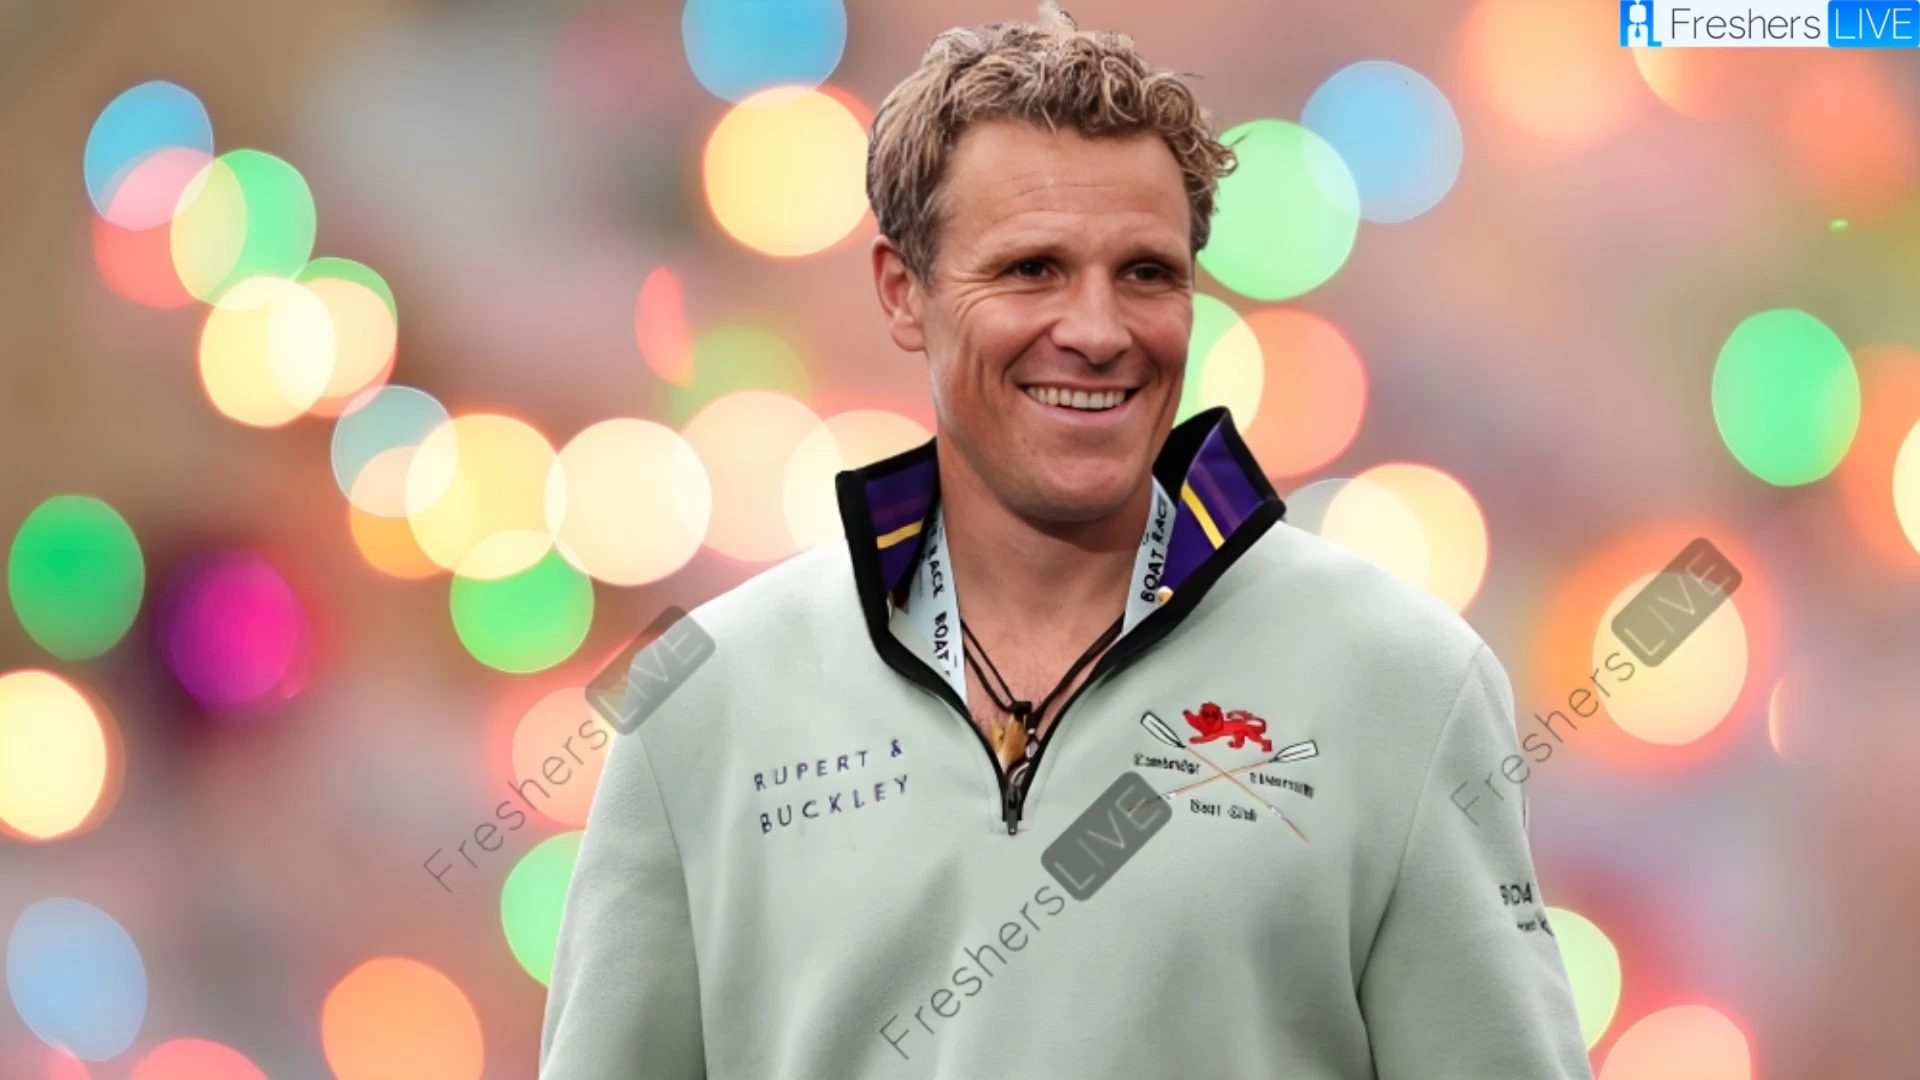 James Cracknell Religion What Religion is James Cracknell? Is James Cracknell a Christian?